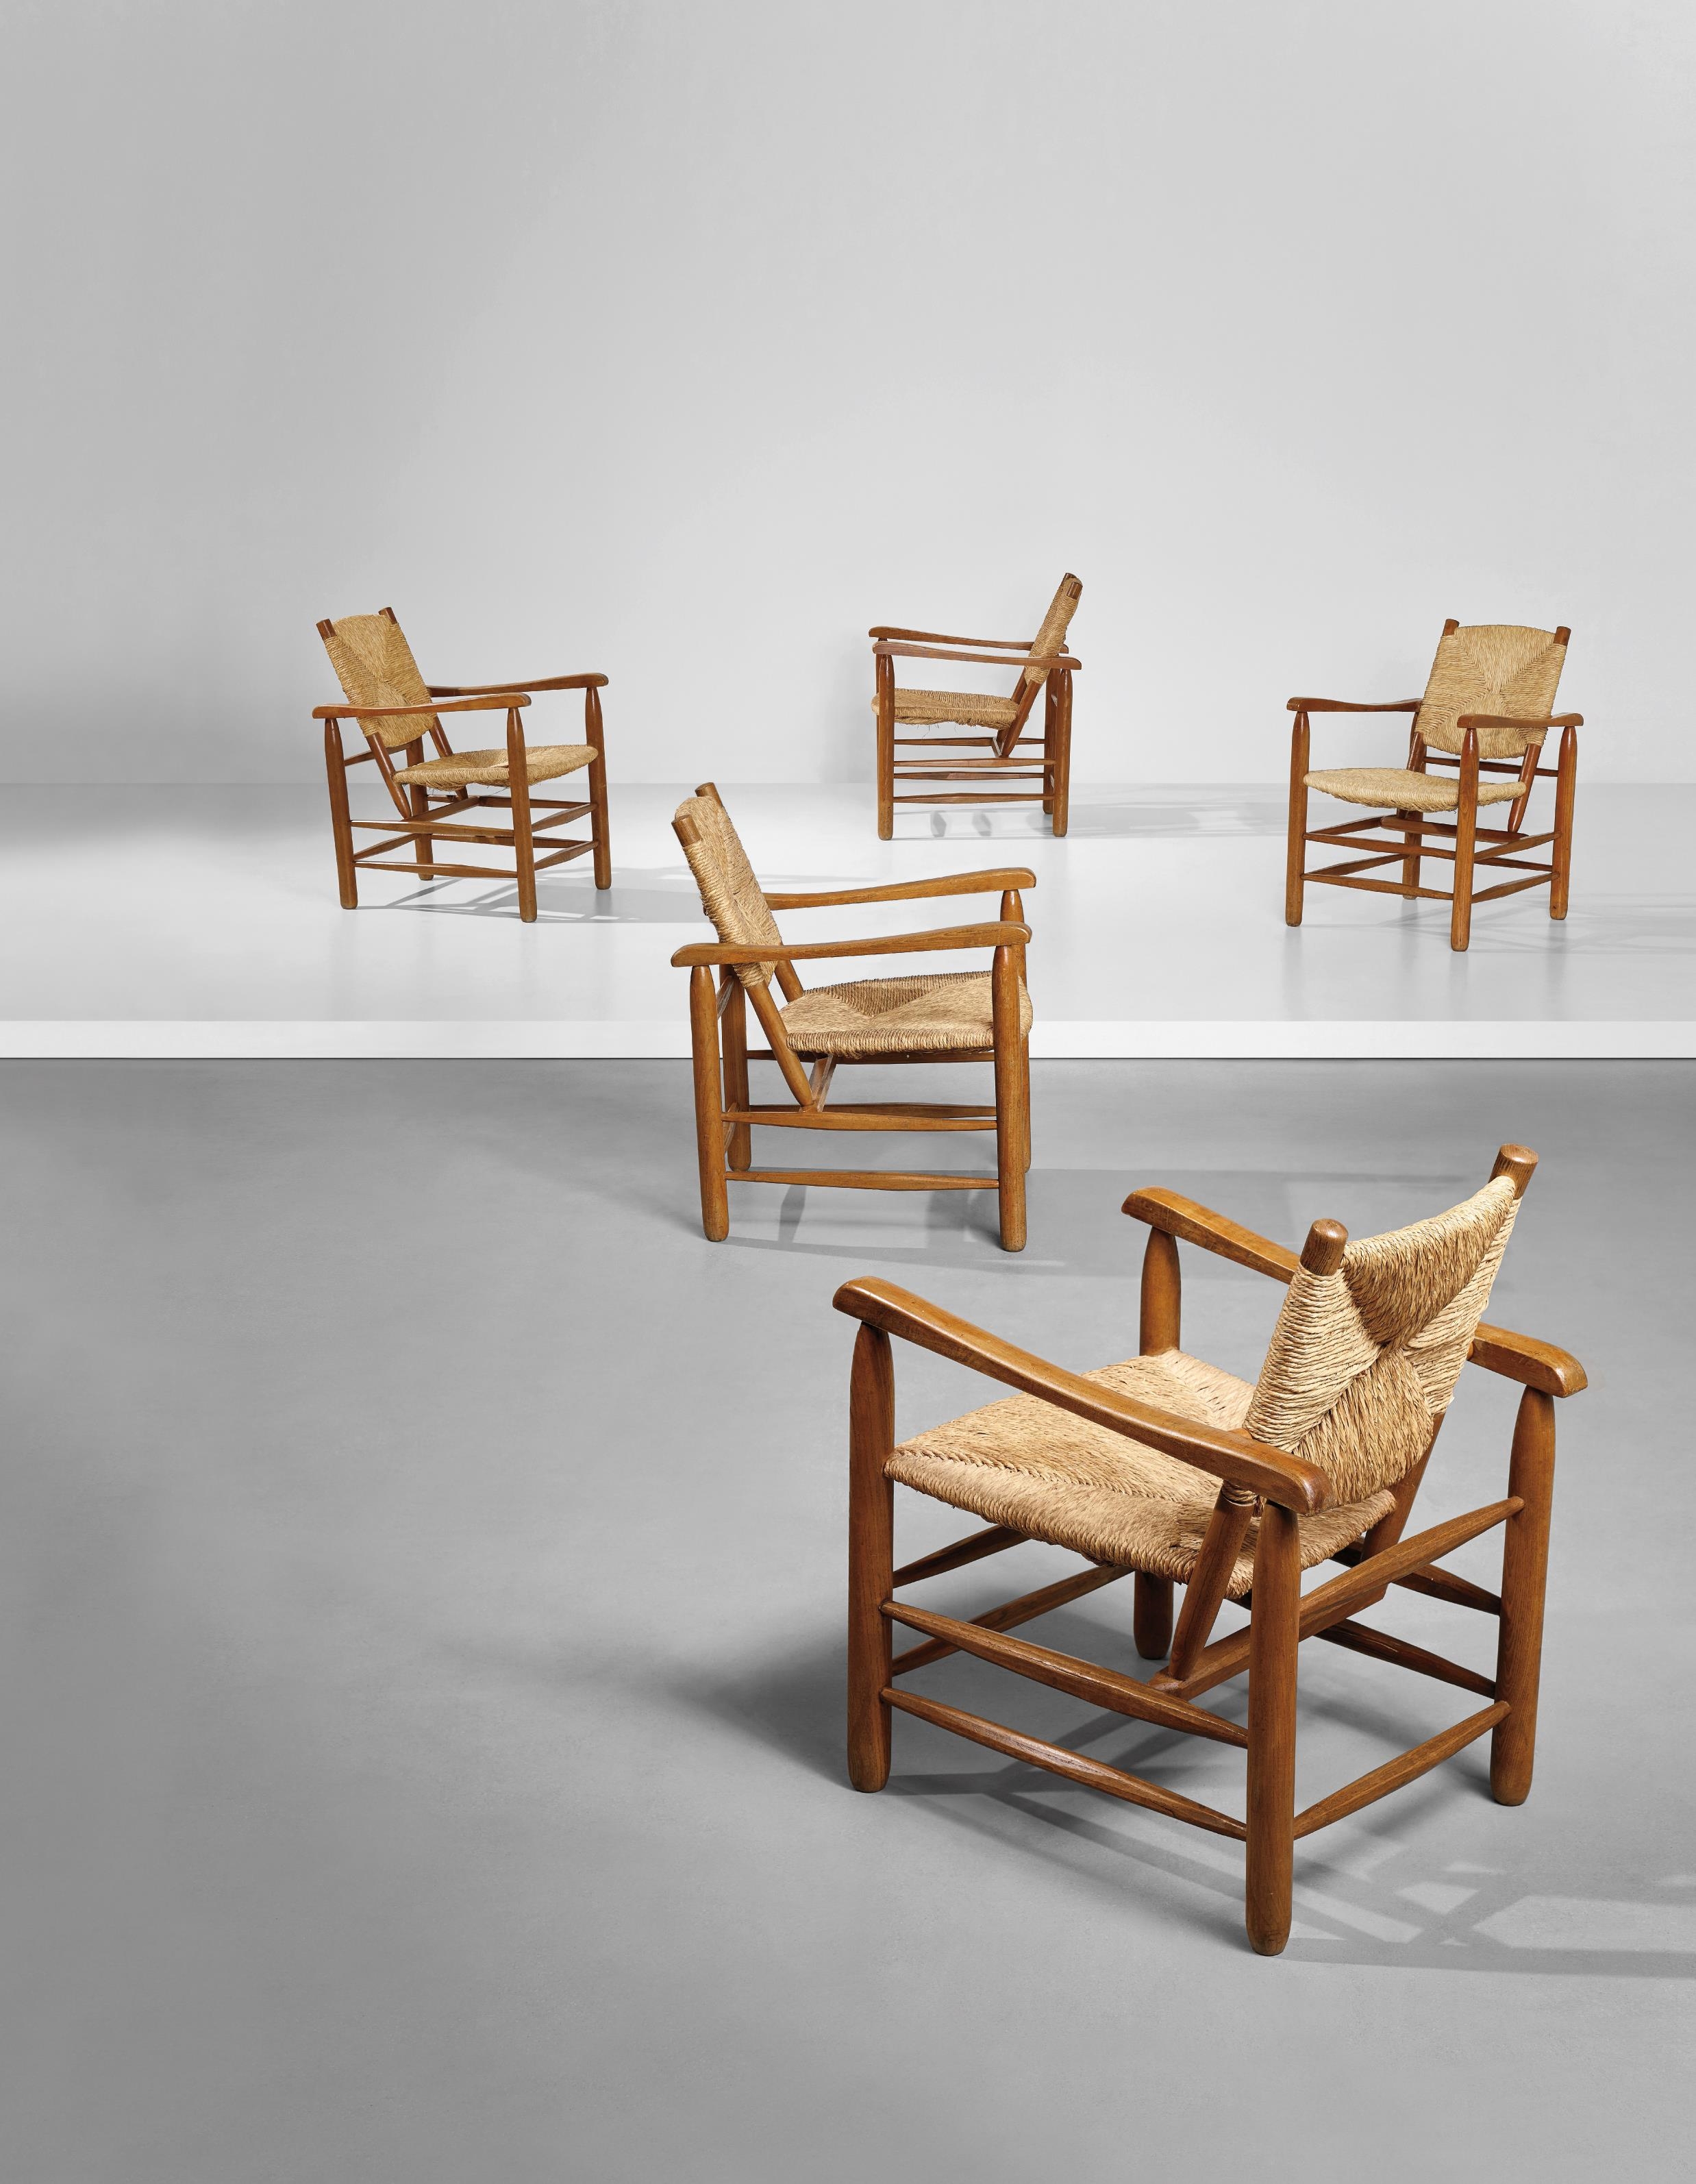 Sold at Auction: Charlotte Perriand, CHARLOTTE PERRIAND, LE